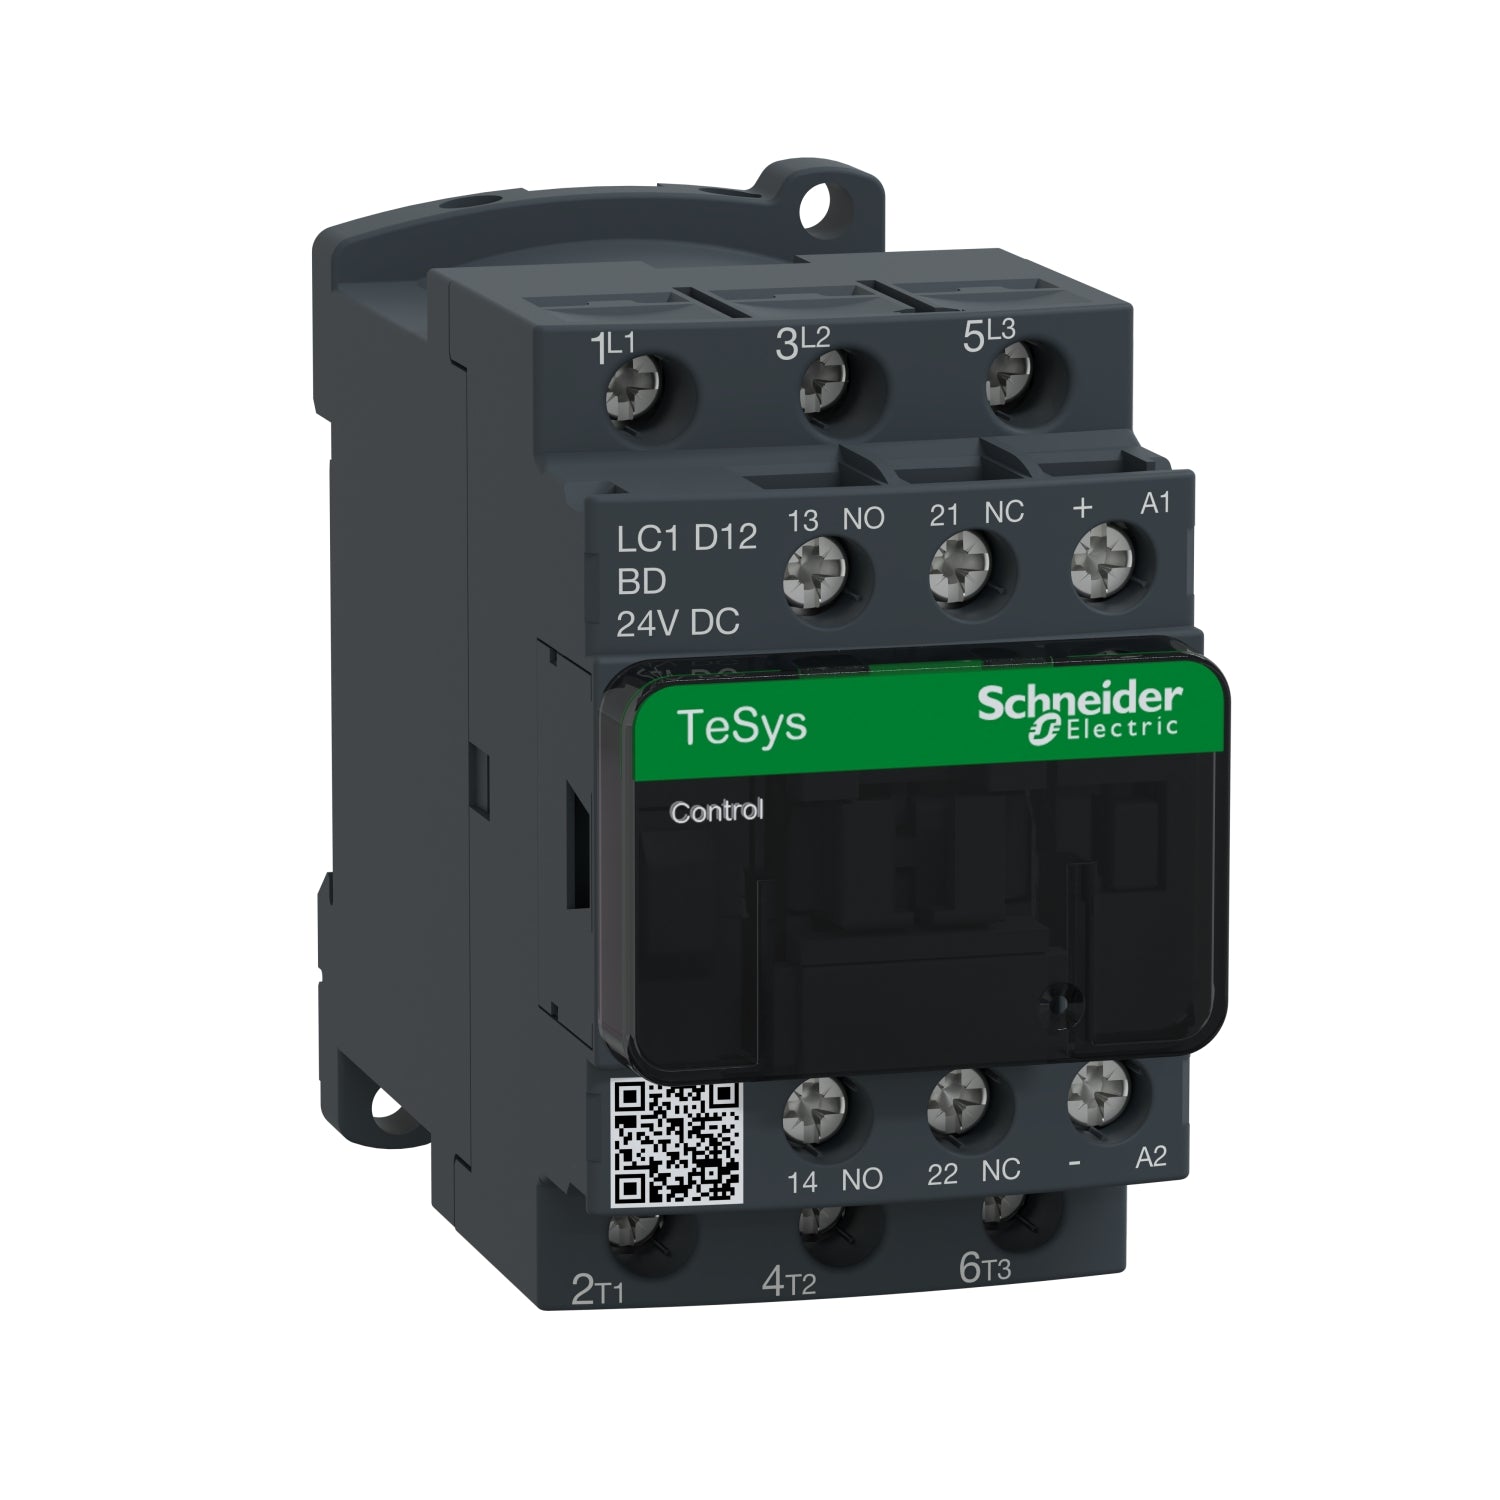 LC1D12BD | Schneider Electric IEC contactor, TeSys Deca, nonreversing, 12A, 7.5HP at 480VAC, up to 100kA SCCR, 3 phase, 3 NO, 24VDC coil, open style